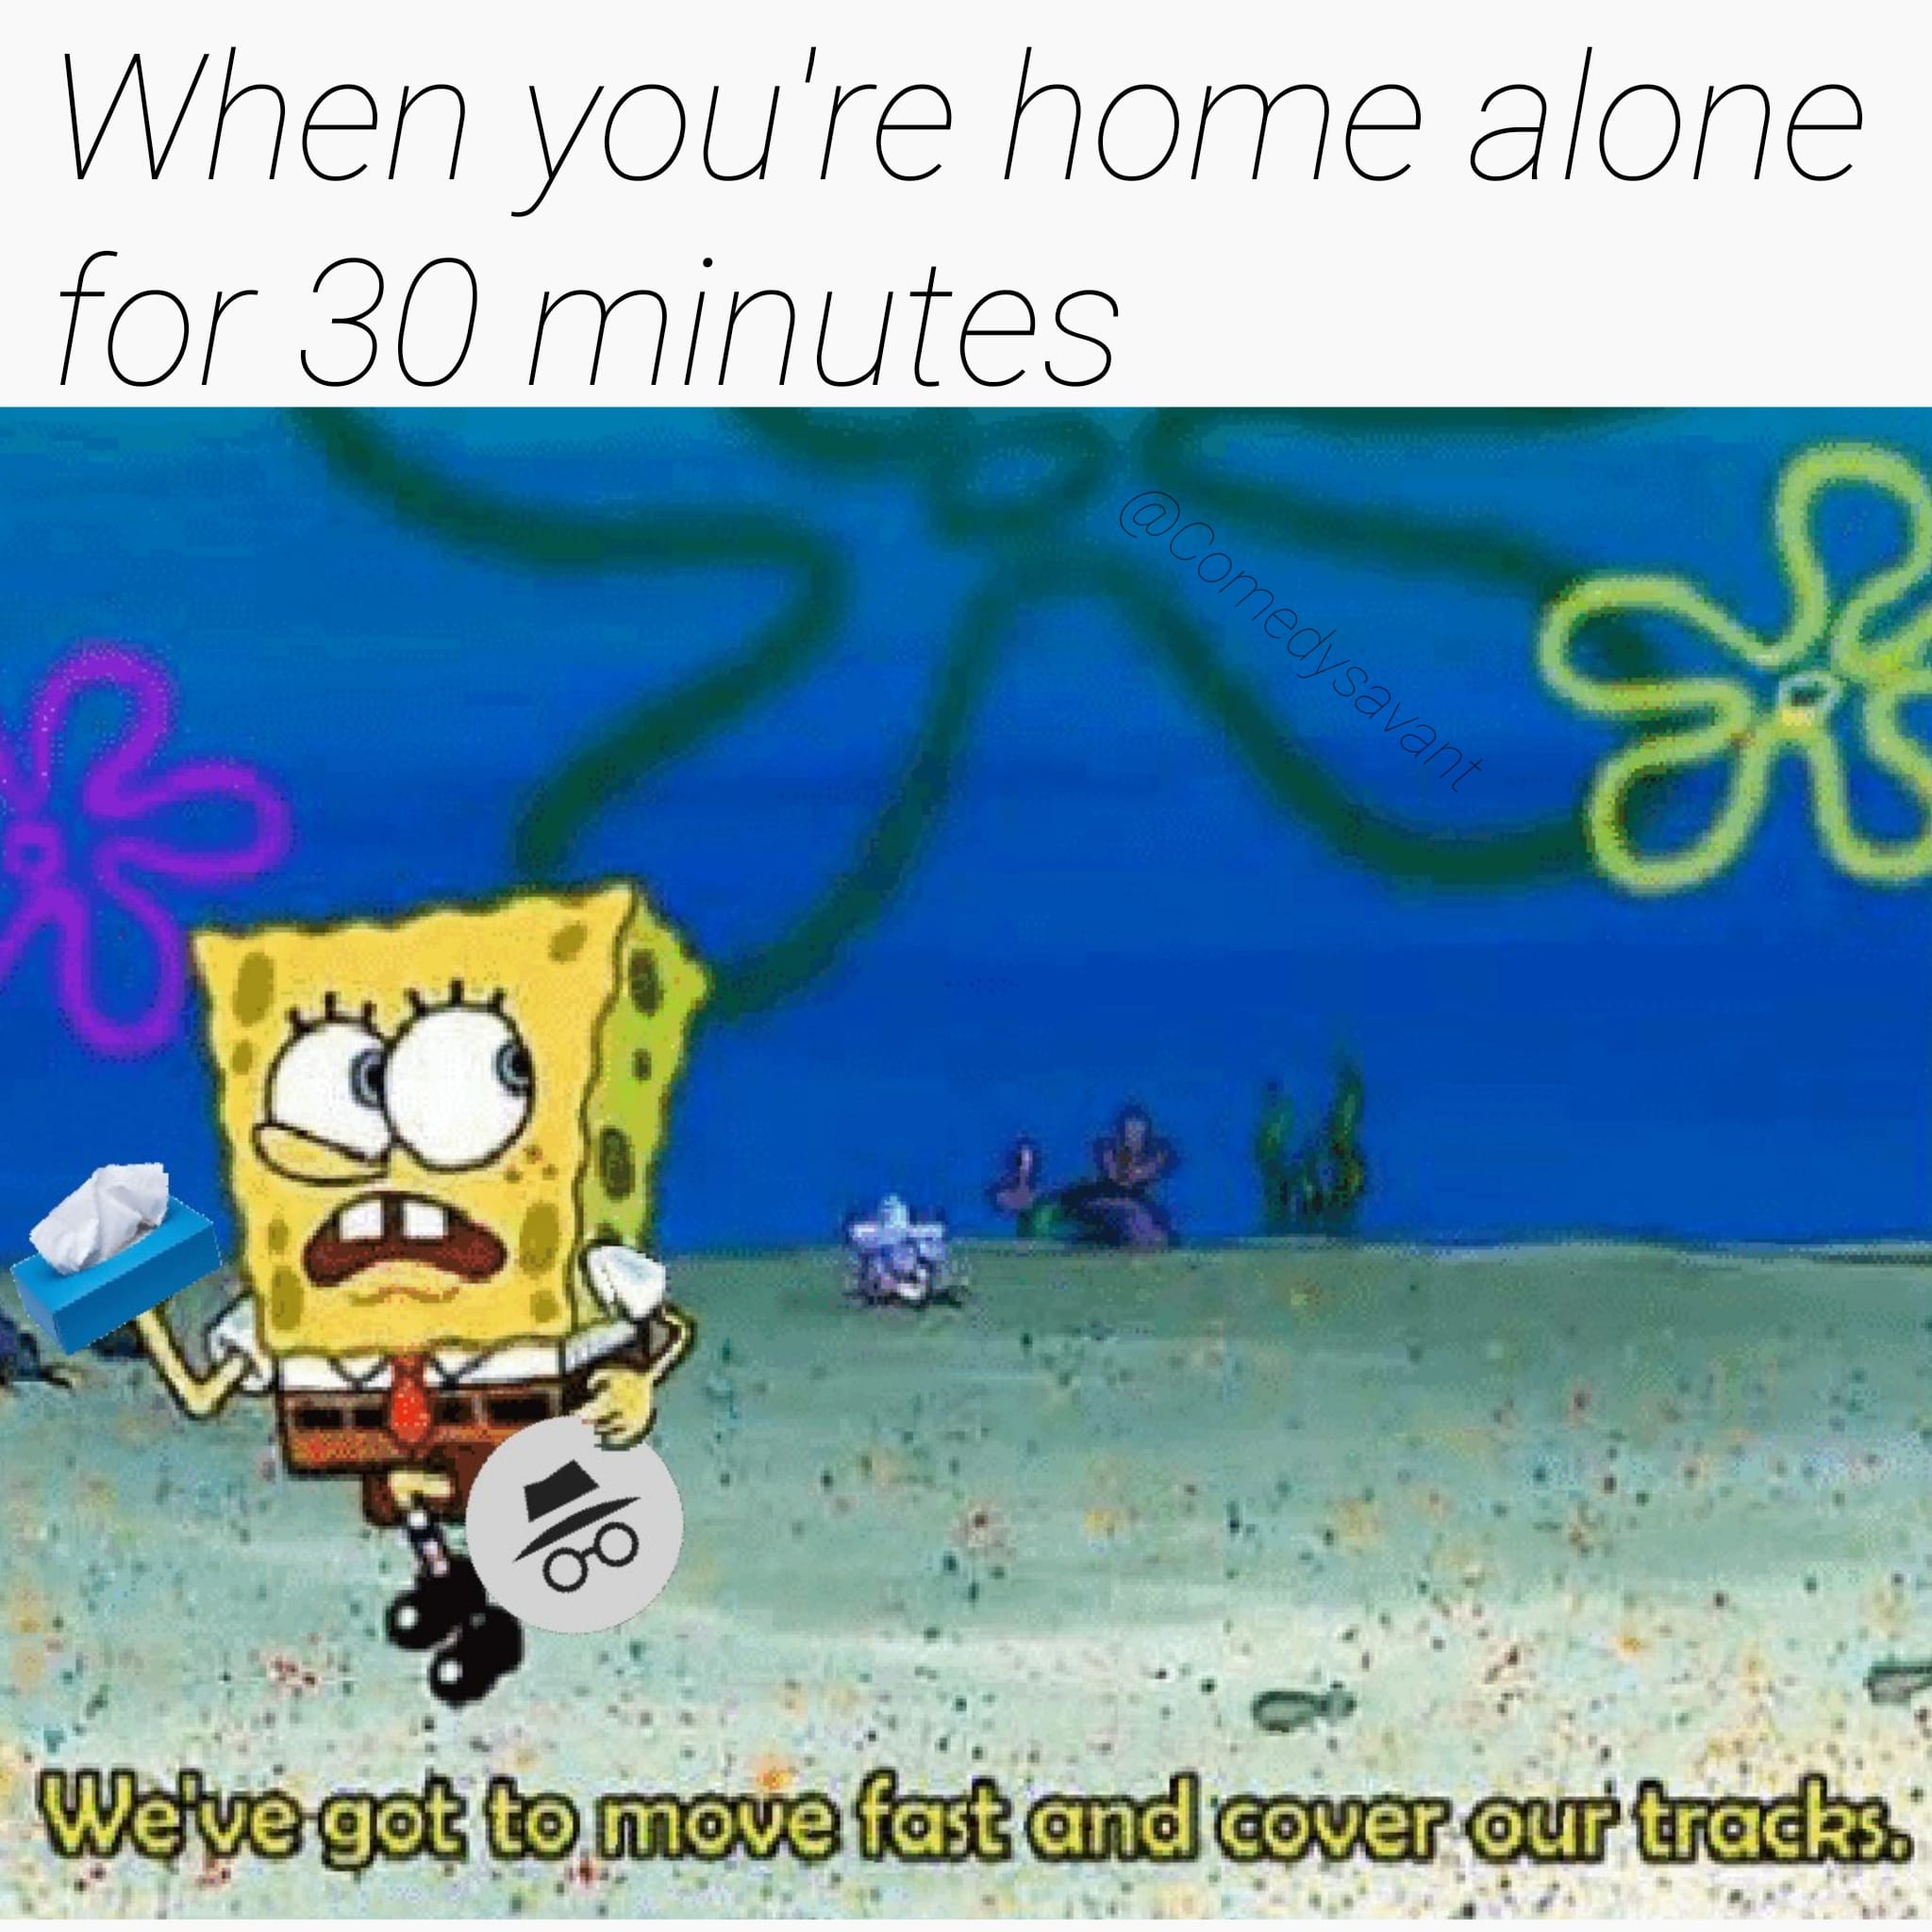 Spongebob, Gotta Spongebob Memes Spongebob, Gotta text: L/ hen you Ire horne for 30 minutes We've got to move fast and cover our tracks, 